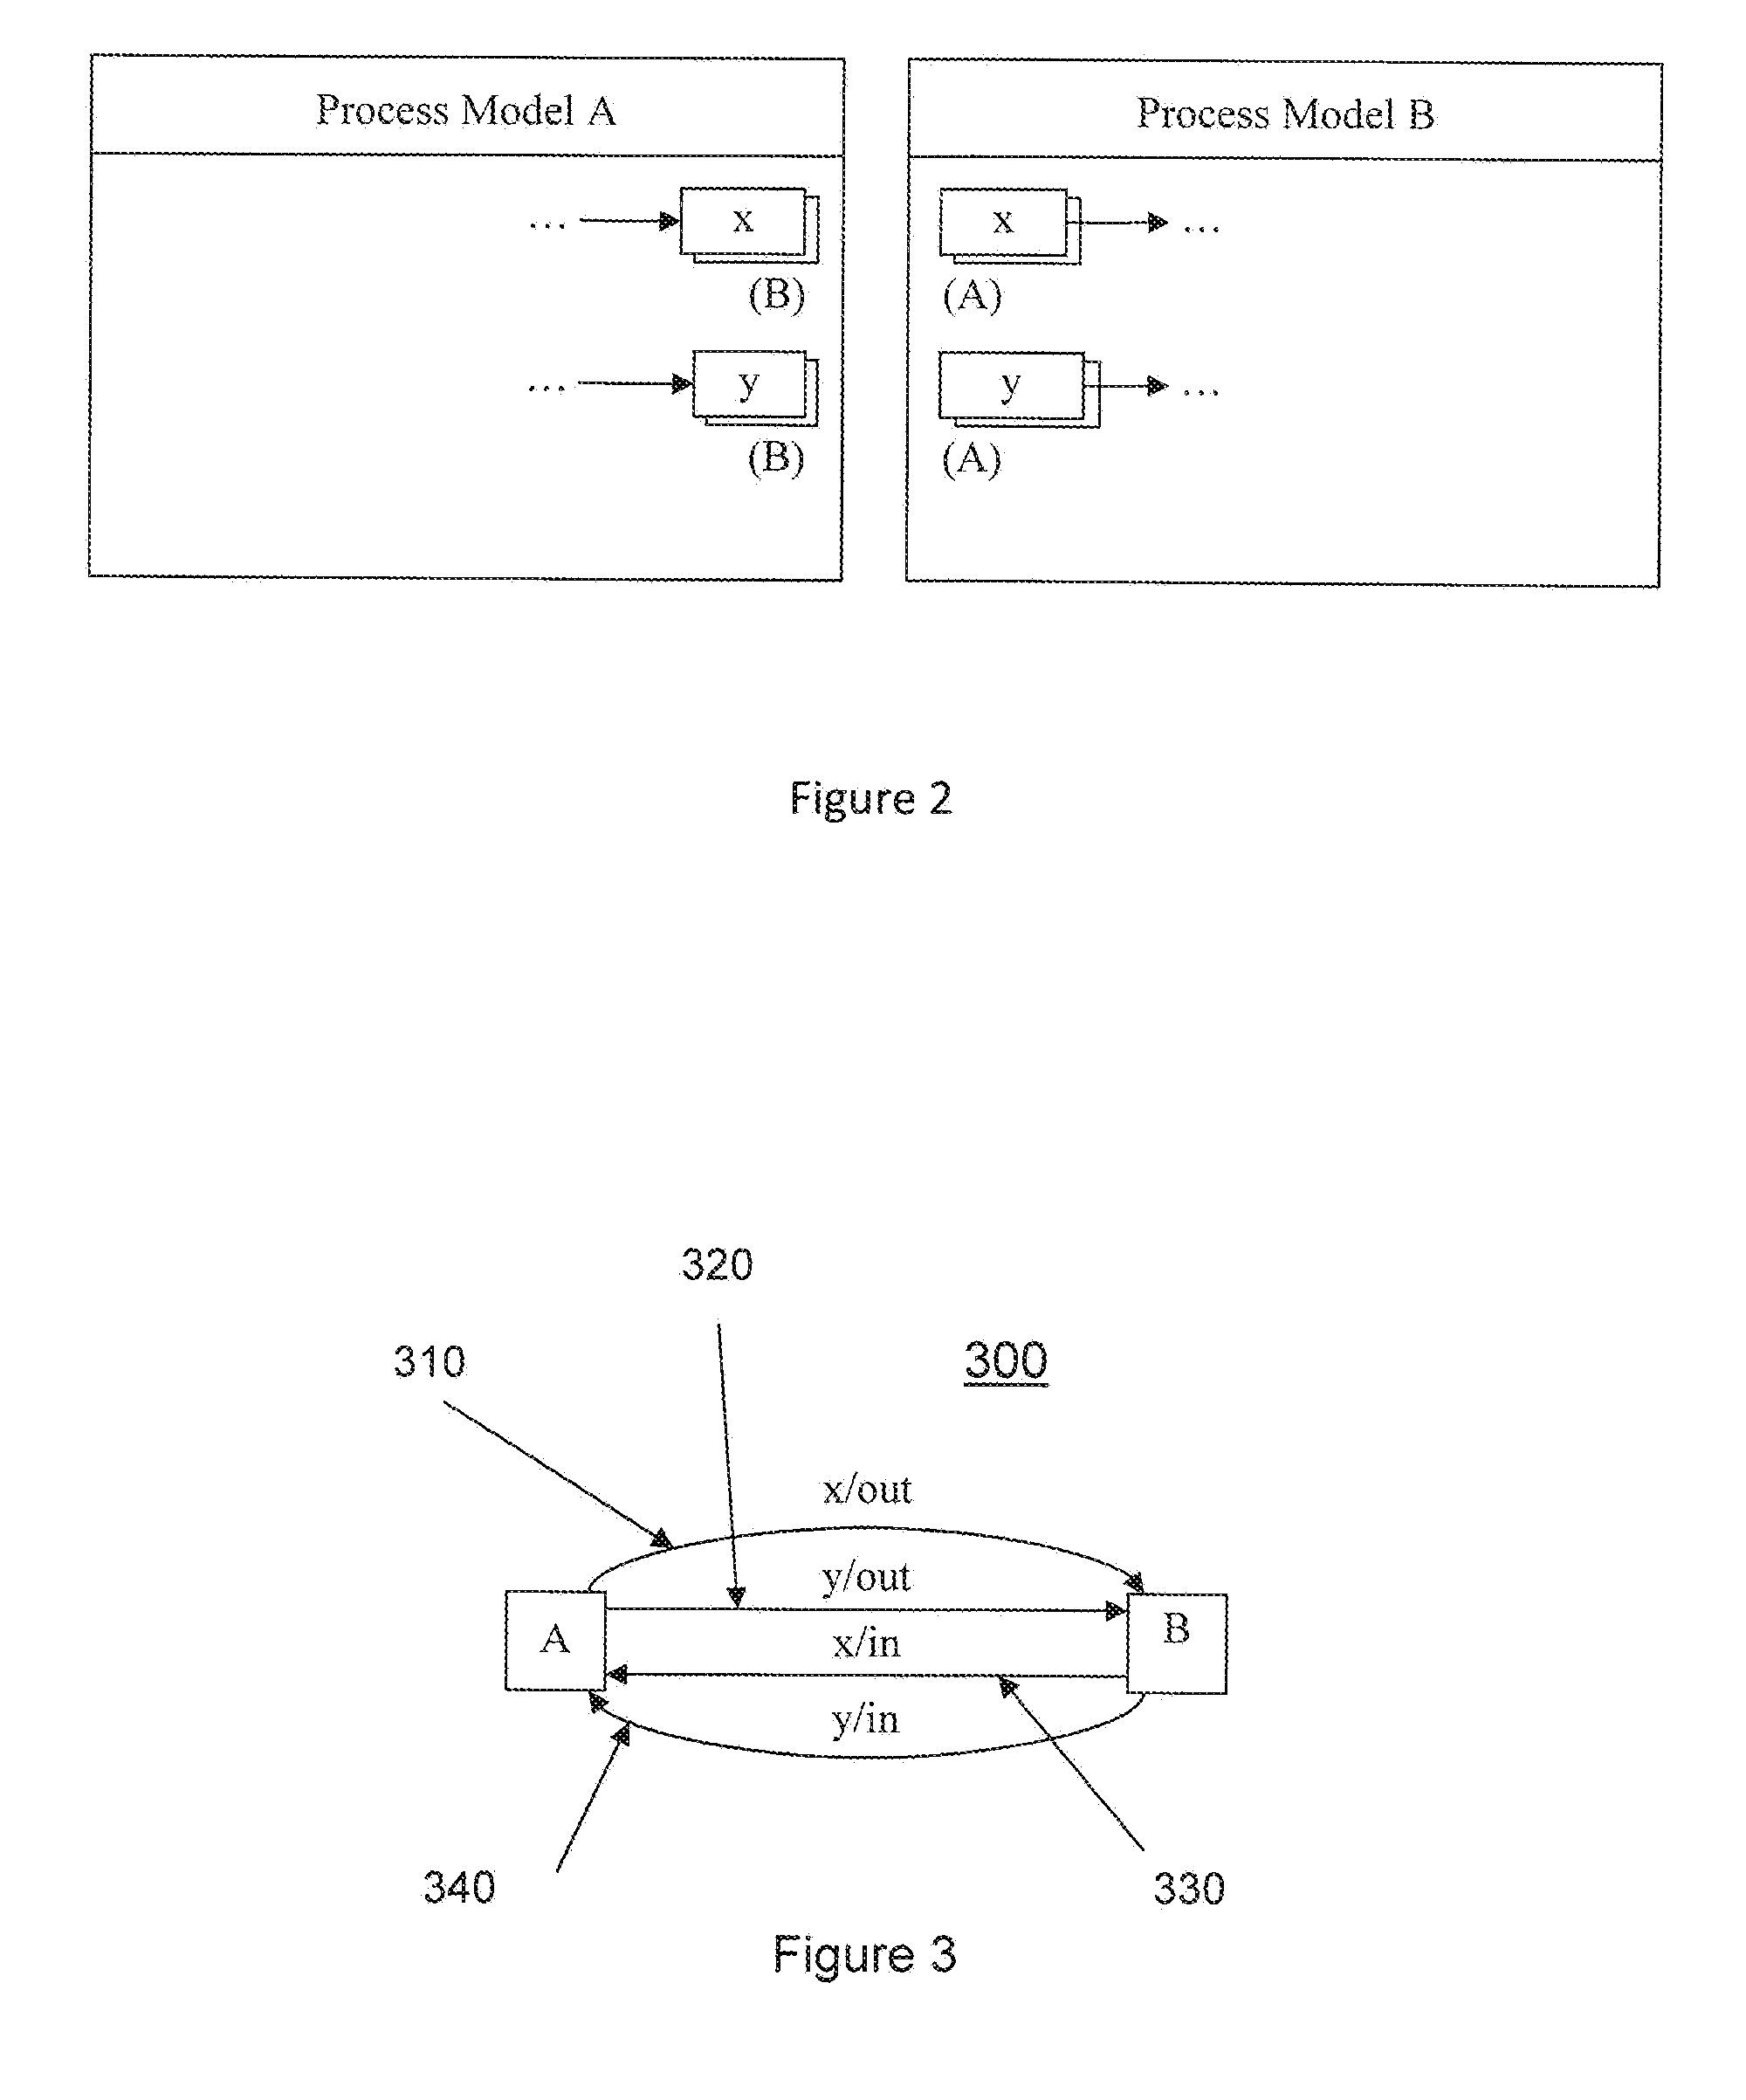 System and method to create process reference maps from links described in a business process model